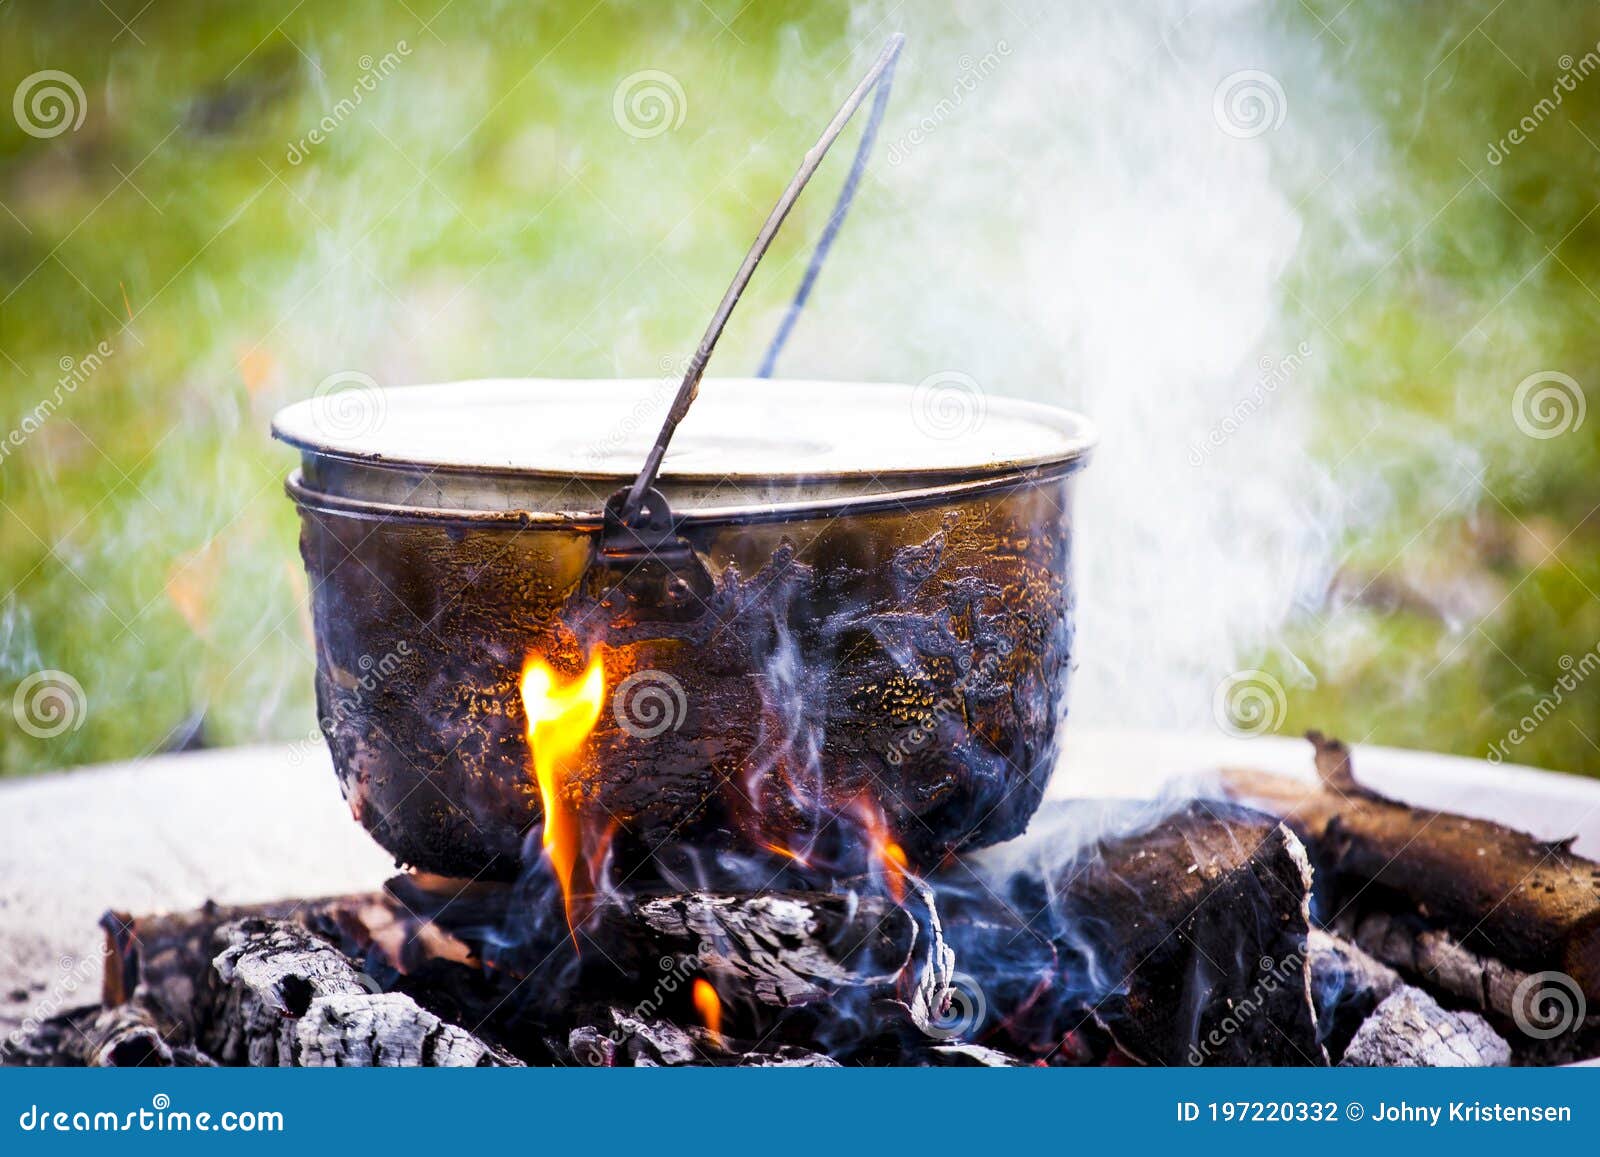 Cooking Large Pot Over The Fire Outdoors Stock Photo, Picture and Royalty  Free Image. Image 79928181.